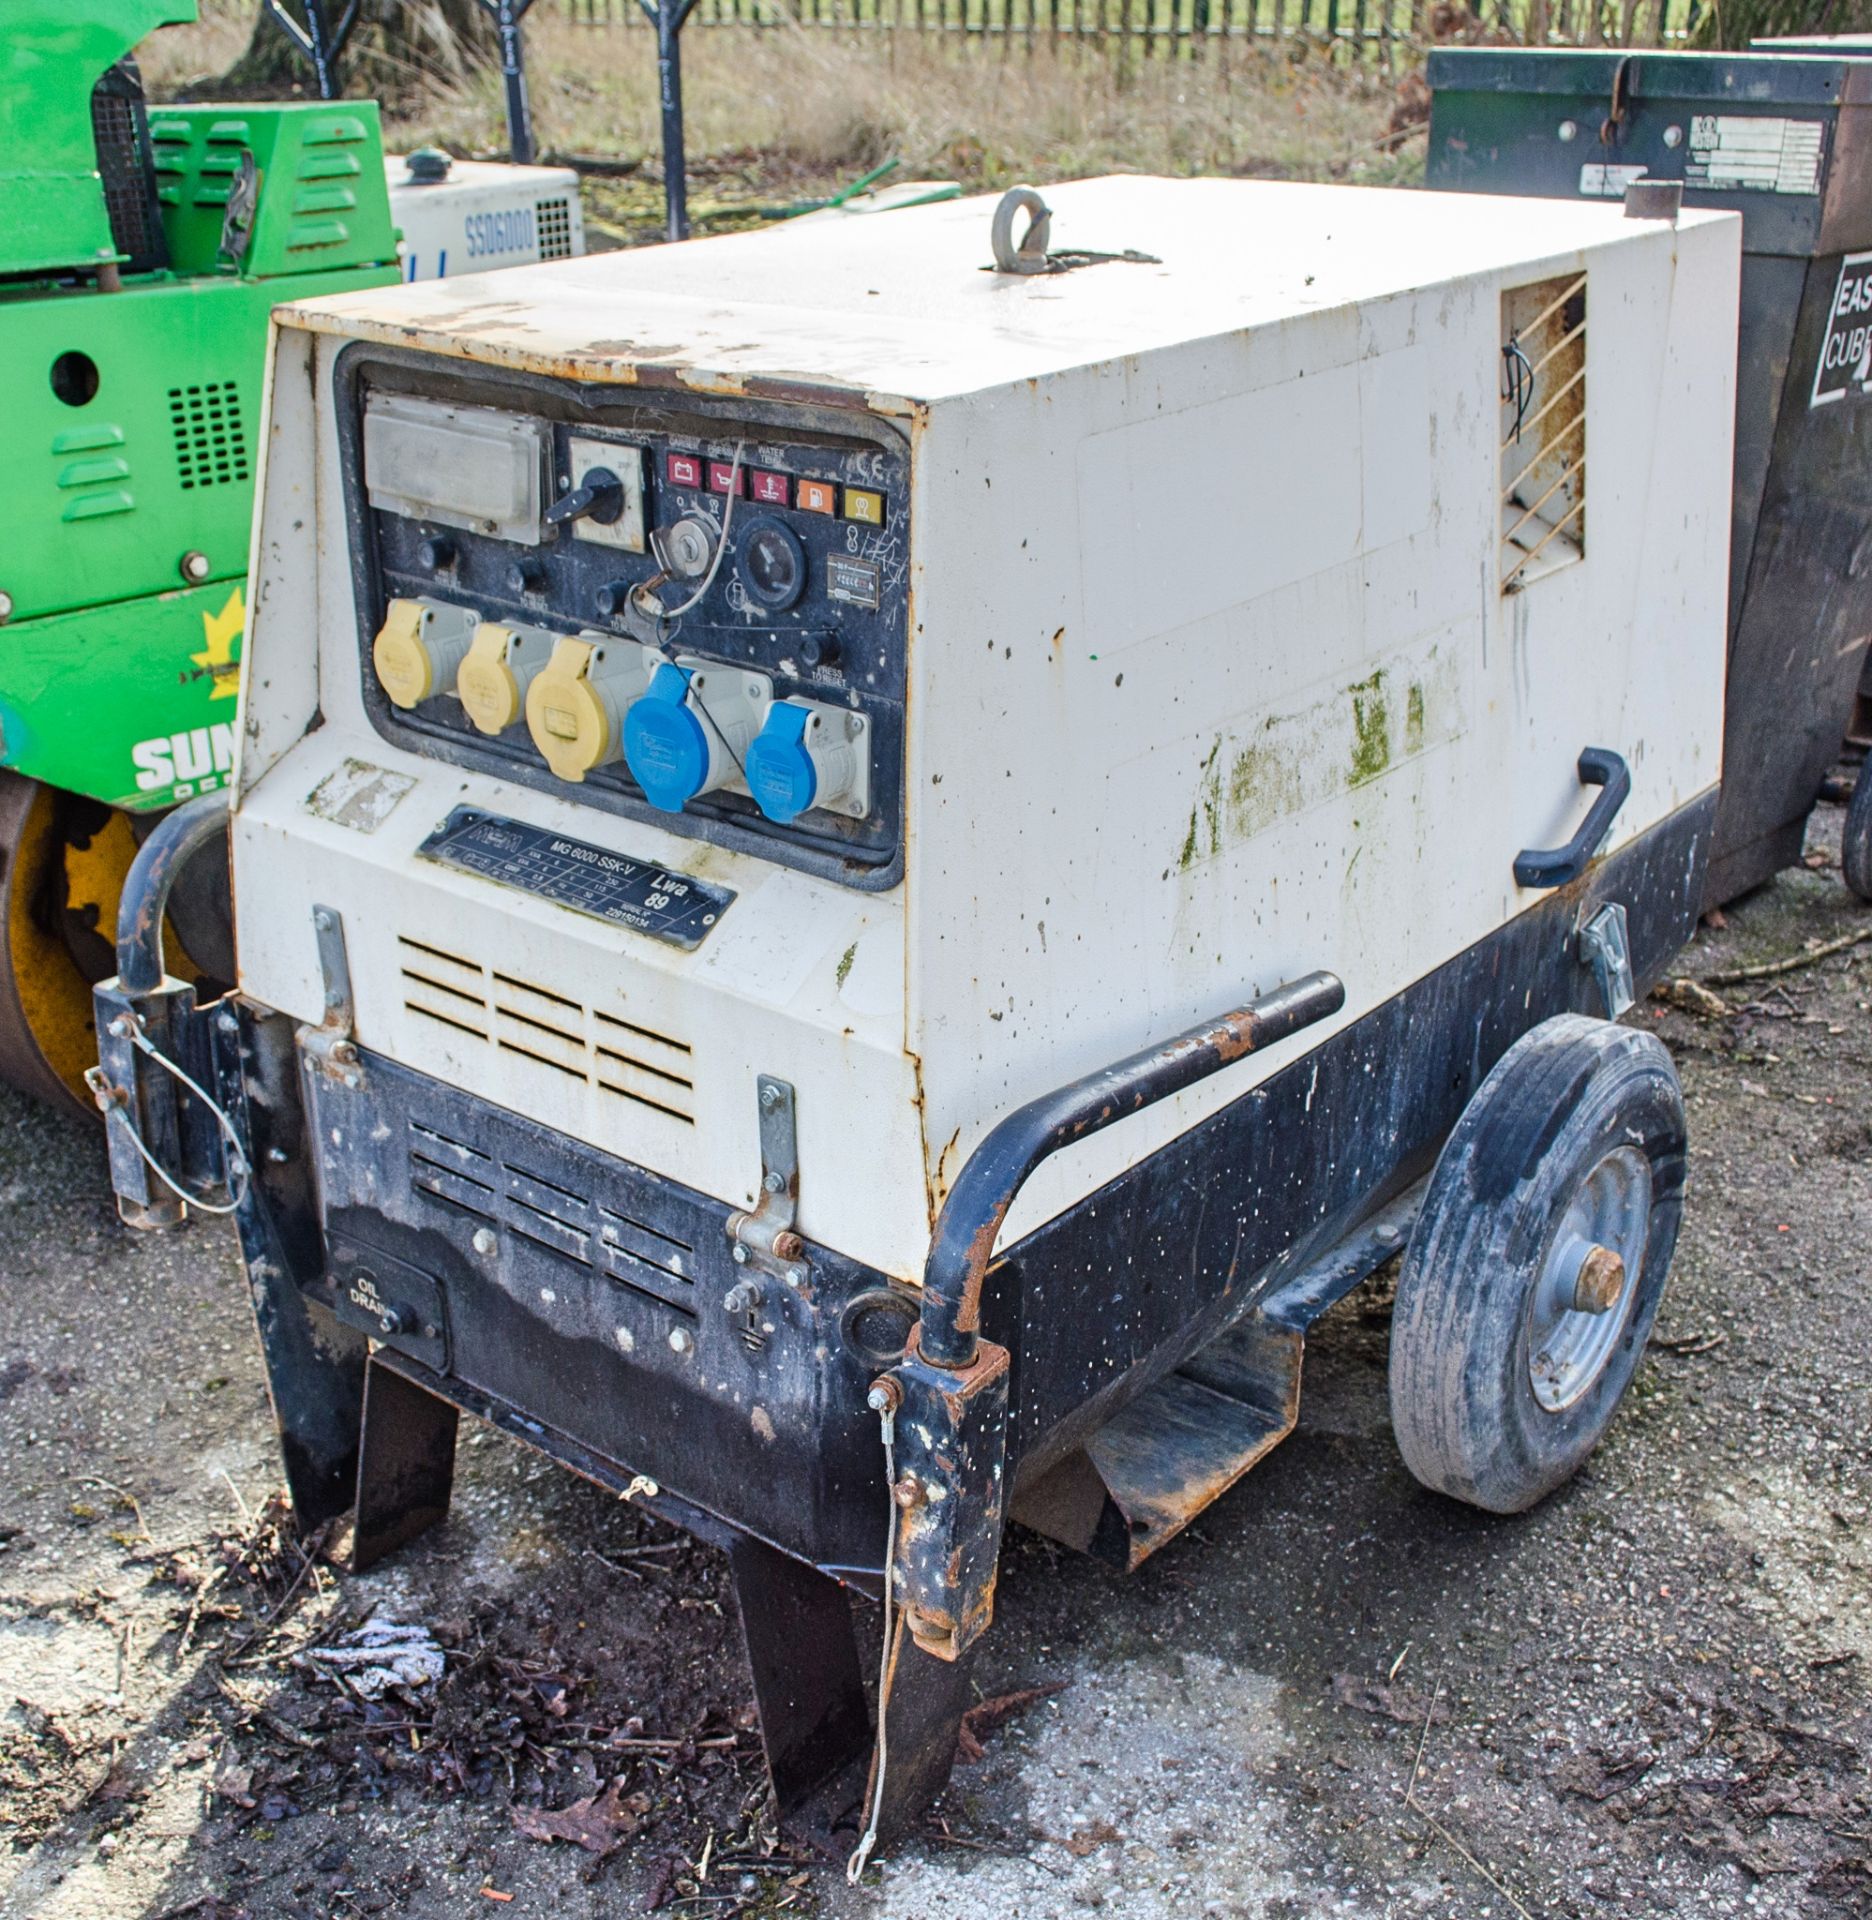 MHM MG6000 SSK-Y 6 kva diesel driven generator S/N: 229150134 Recorded hours: 4519 A723324